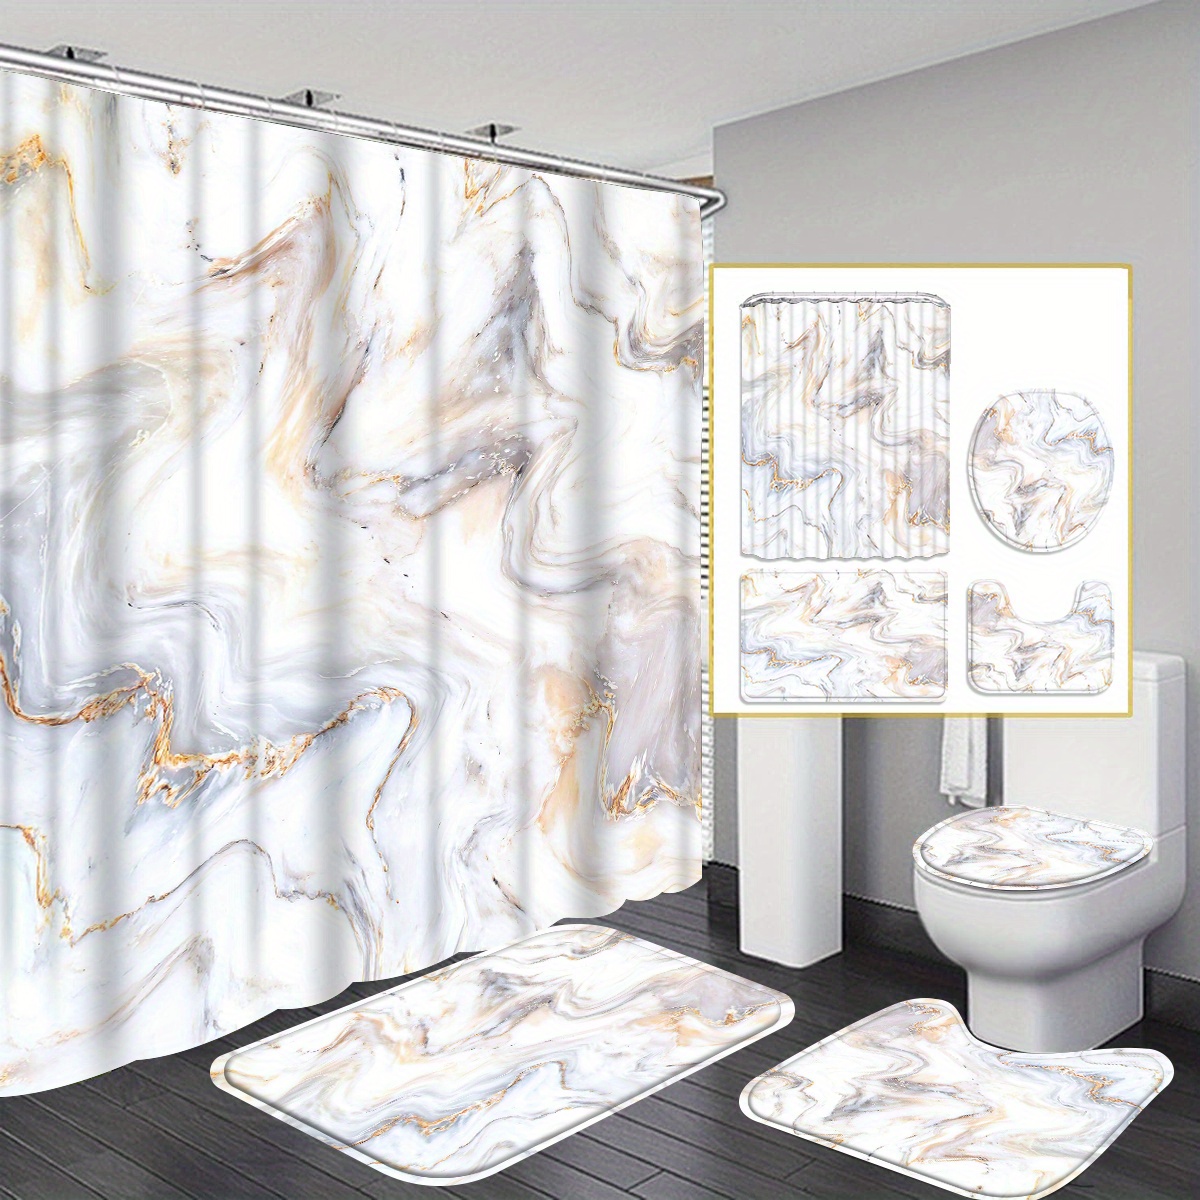 

4pcs White Marble Grain Shower Curtain Gift Modern Home Bathroom Decoration Curtain And Toilet Floor Mat 3-piece Set With 12 Shower Curtain Hooks